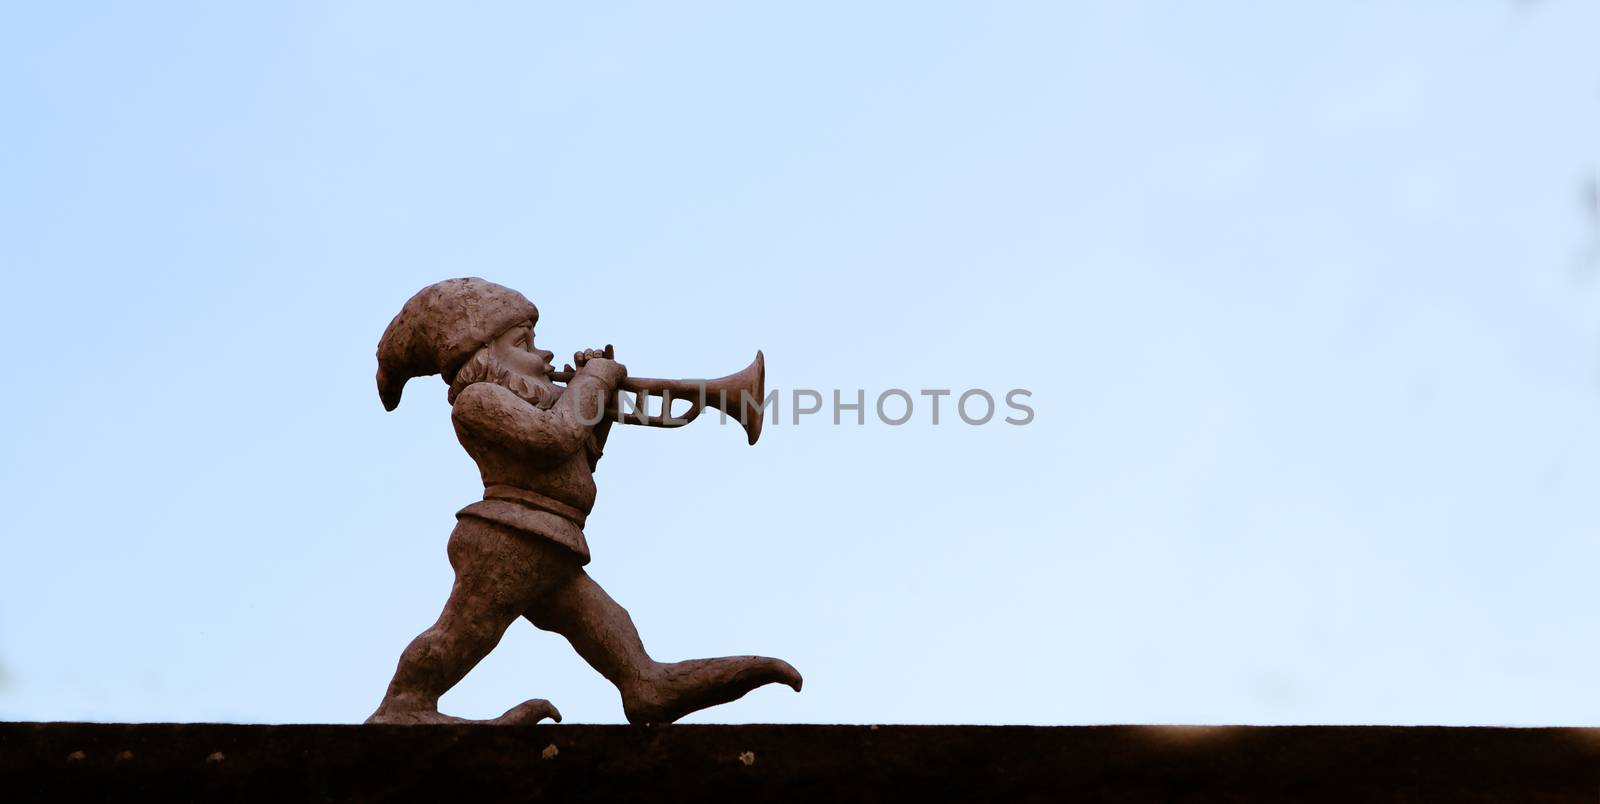 dwarf playing a trumpet in front of blue sky